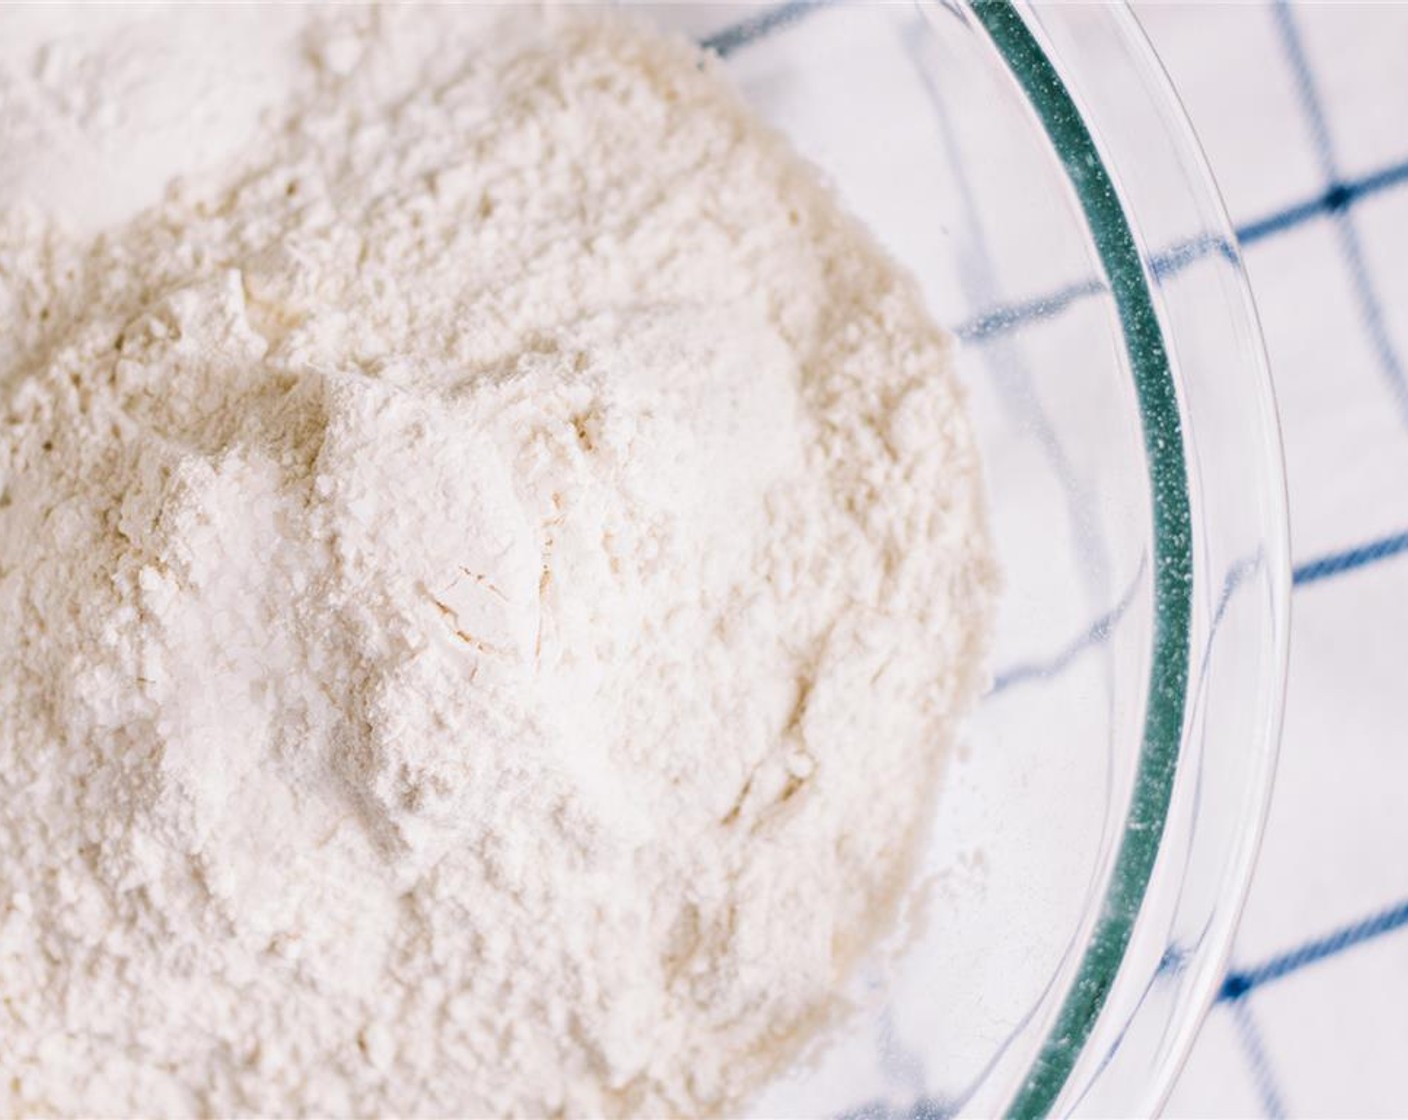 step 2 In a large bowl, whisk together All-Purpose Flour (1 1/4 cups), Almond Meal (1 1/4 cups), Baking Powder (1 Tbsp) and Salt (1/2 tsp).